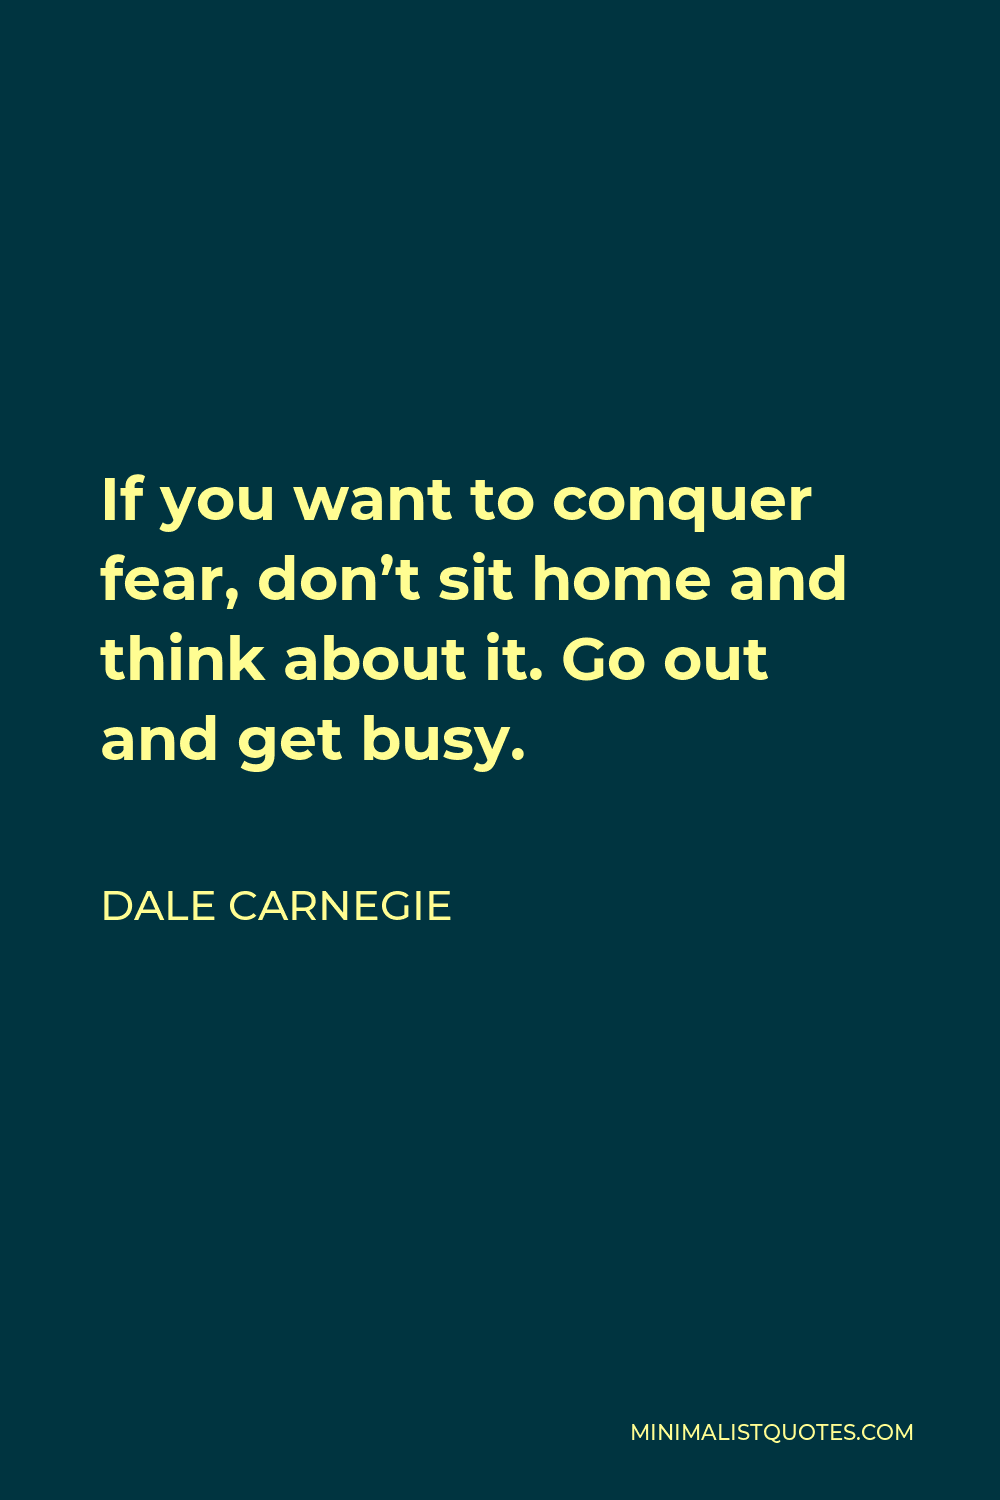 Dale Carnegie Quote - If you want to conquer fear, don’t sit home and think about it. Go out and get busy.